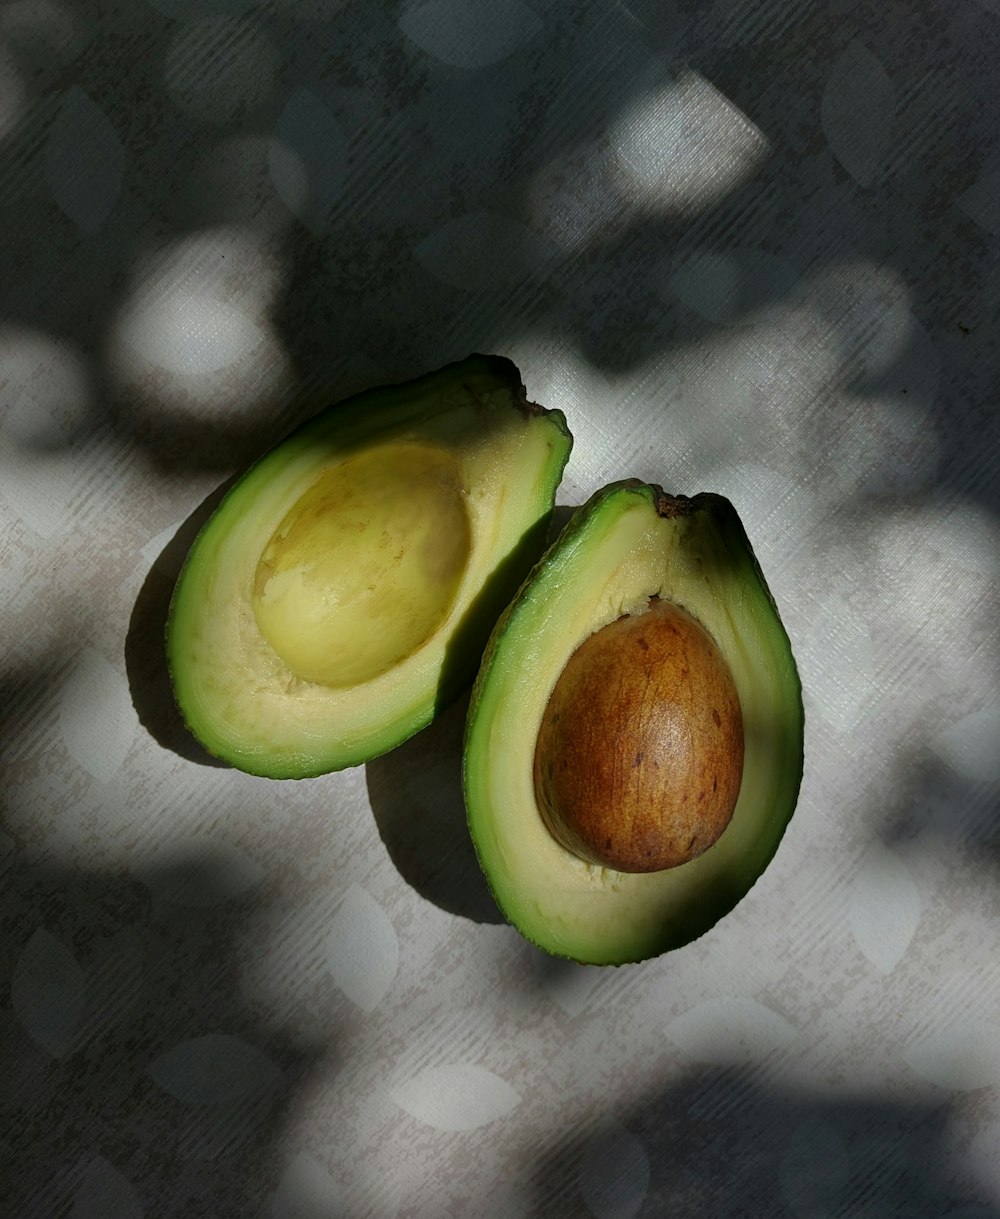 two halves of an avocado sitting on a table